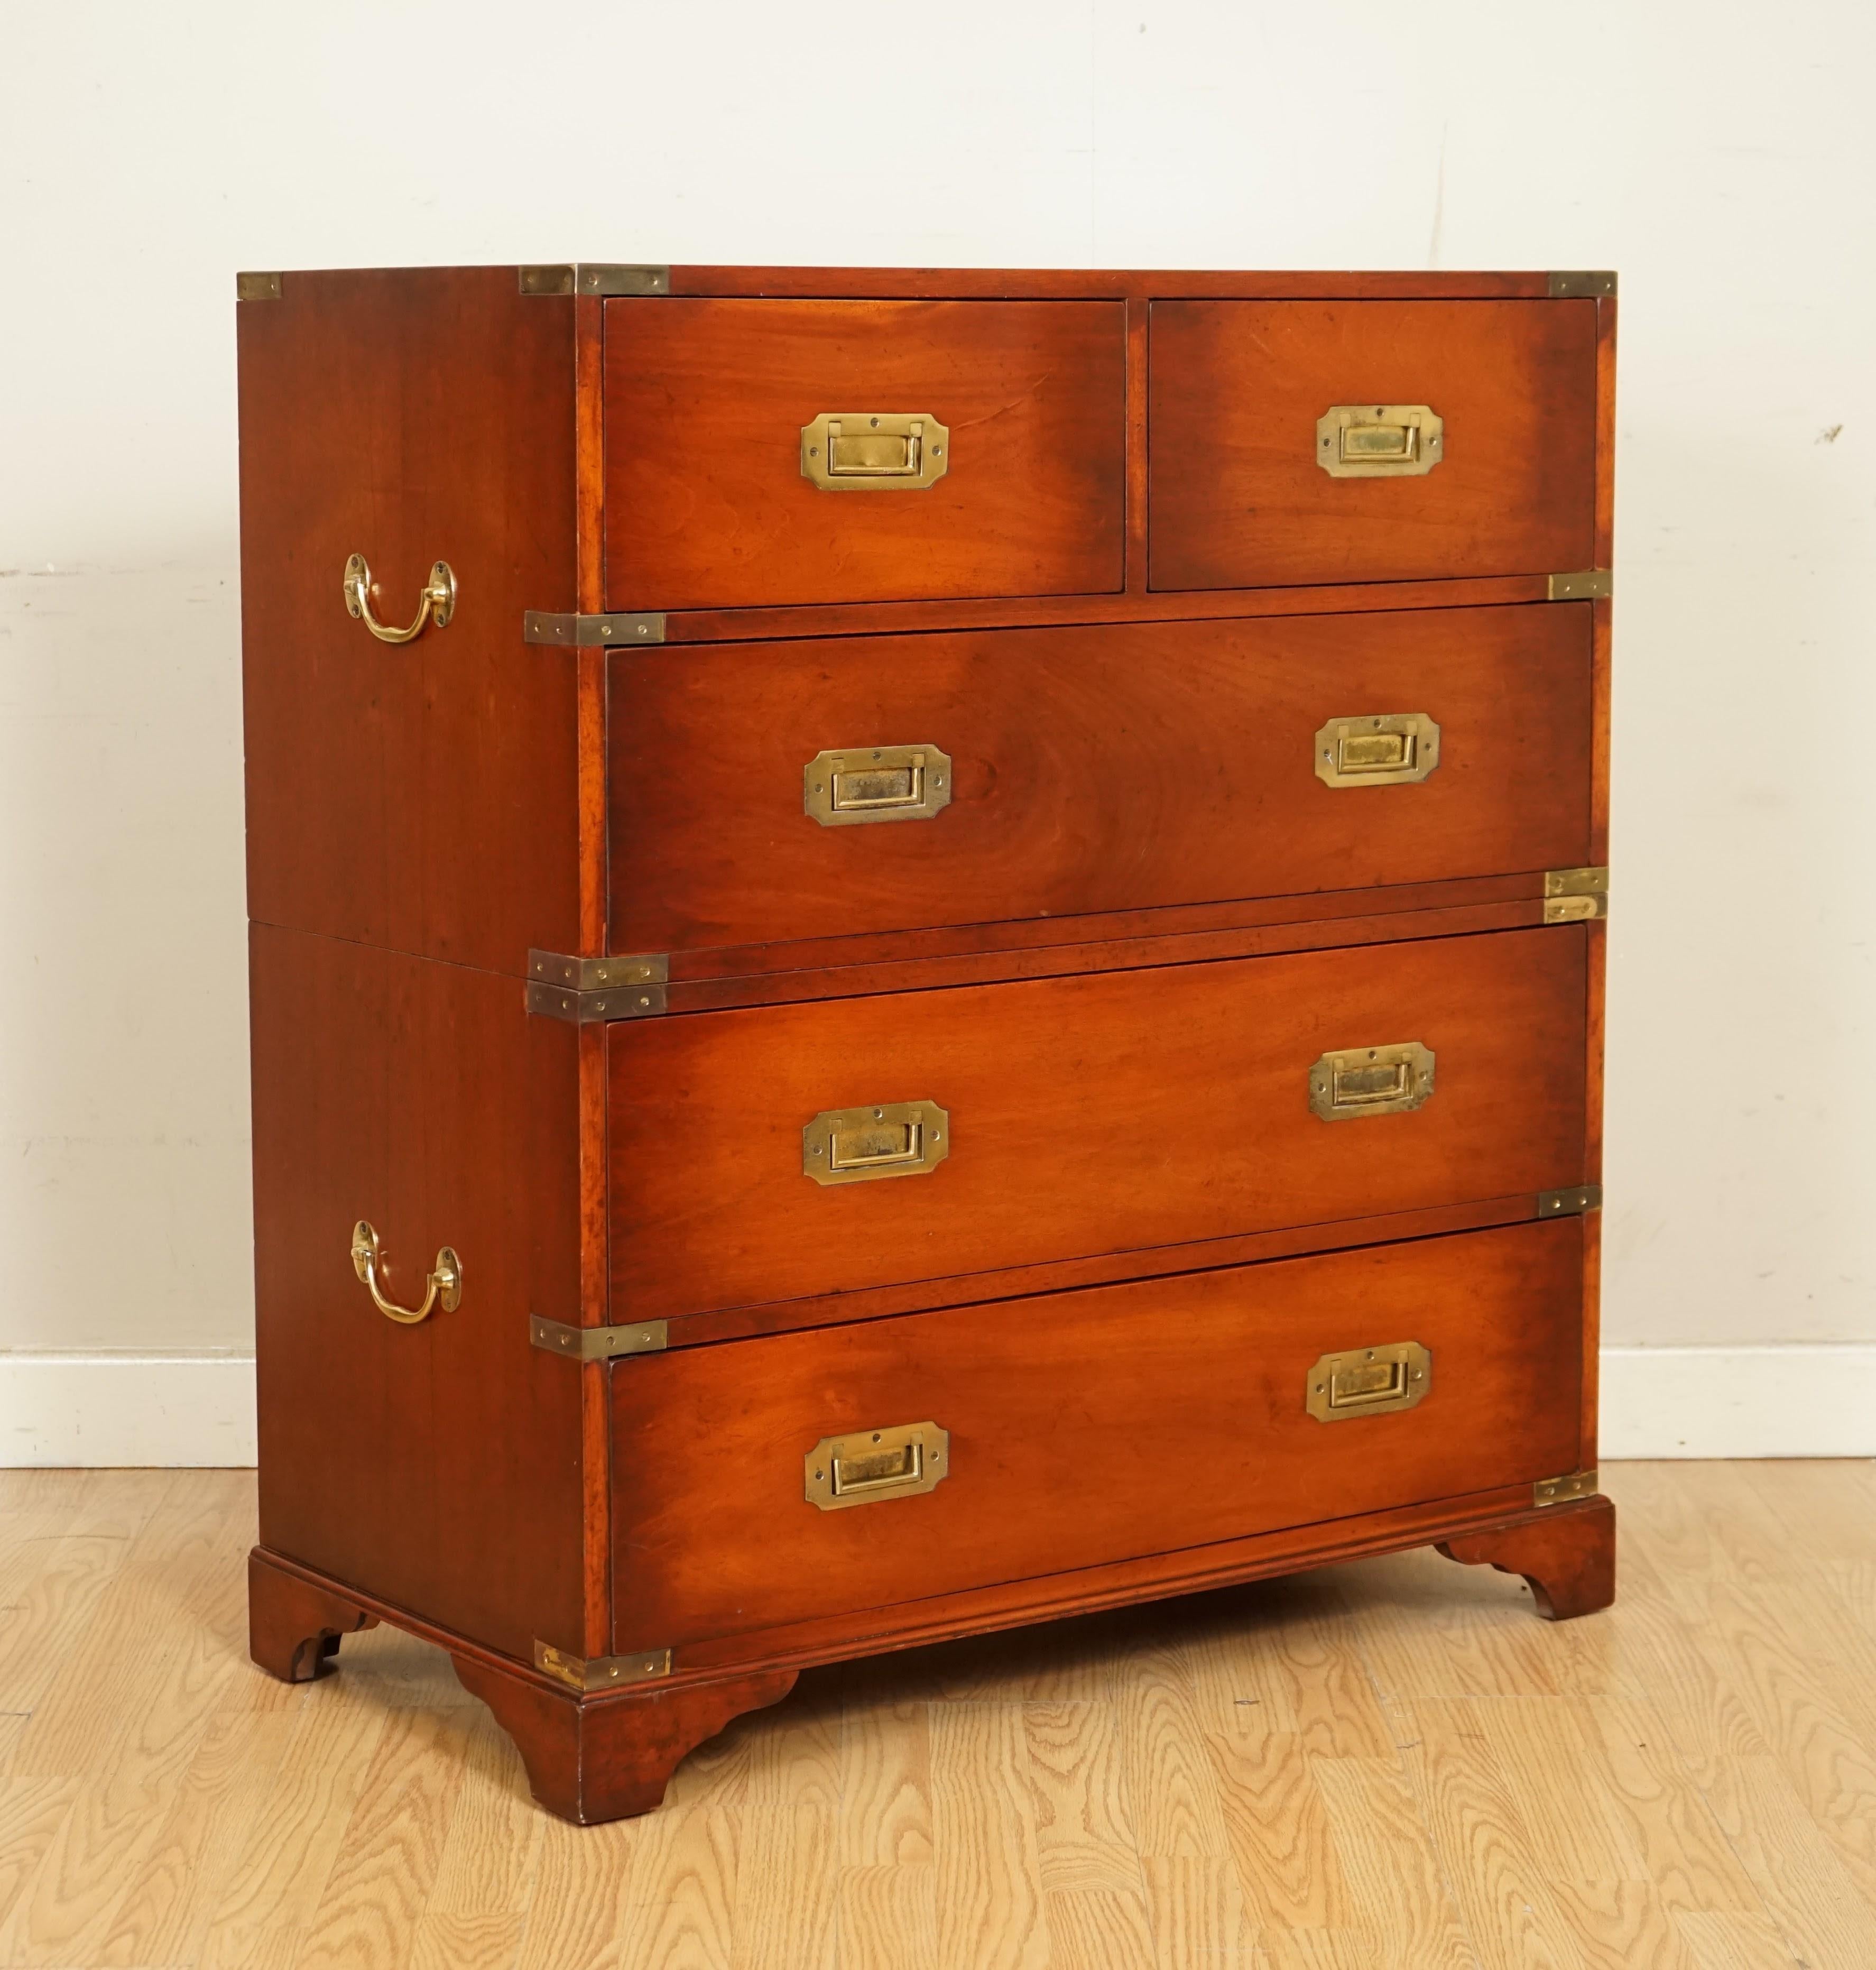 We are so excited to present to you this Lovely Vintage Military Campaign Chest of Drawers.

We have lightly restored this by giving it a hand clean all over, hand waxed and hand polish. 

Please carefully look at the pictures to see the